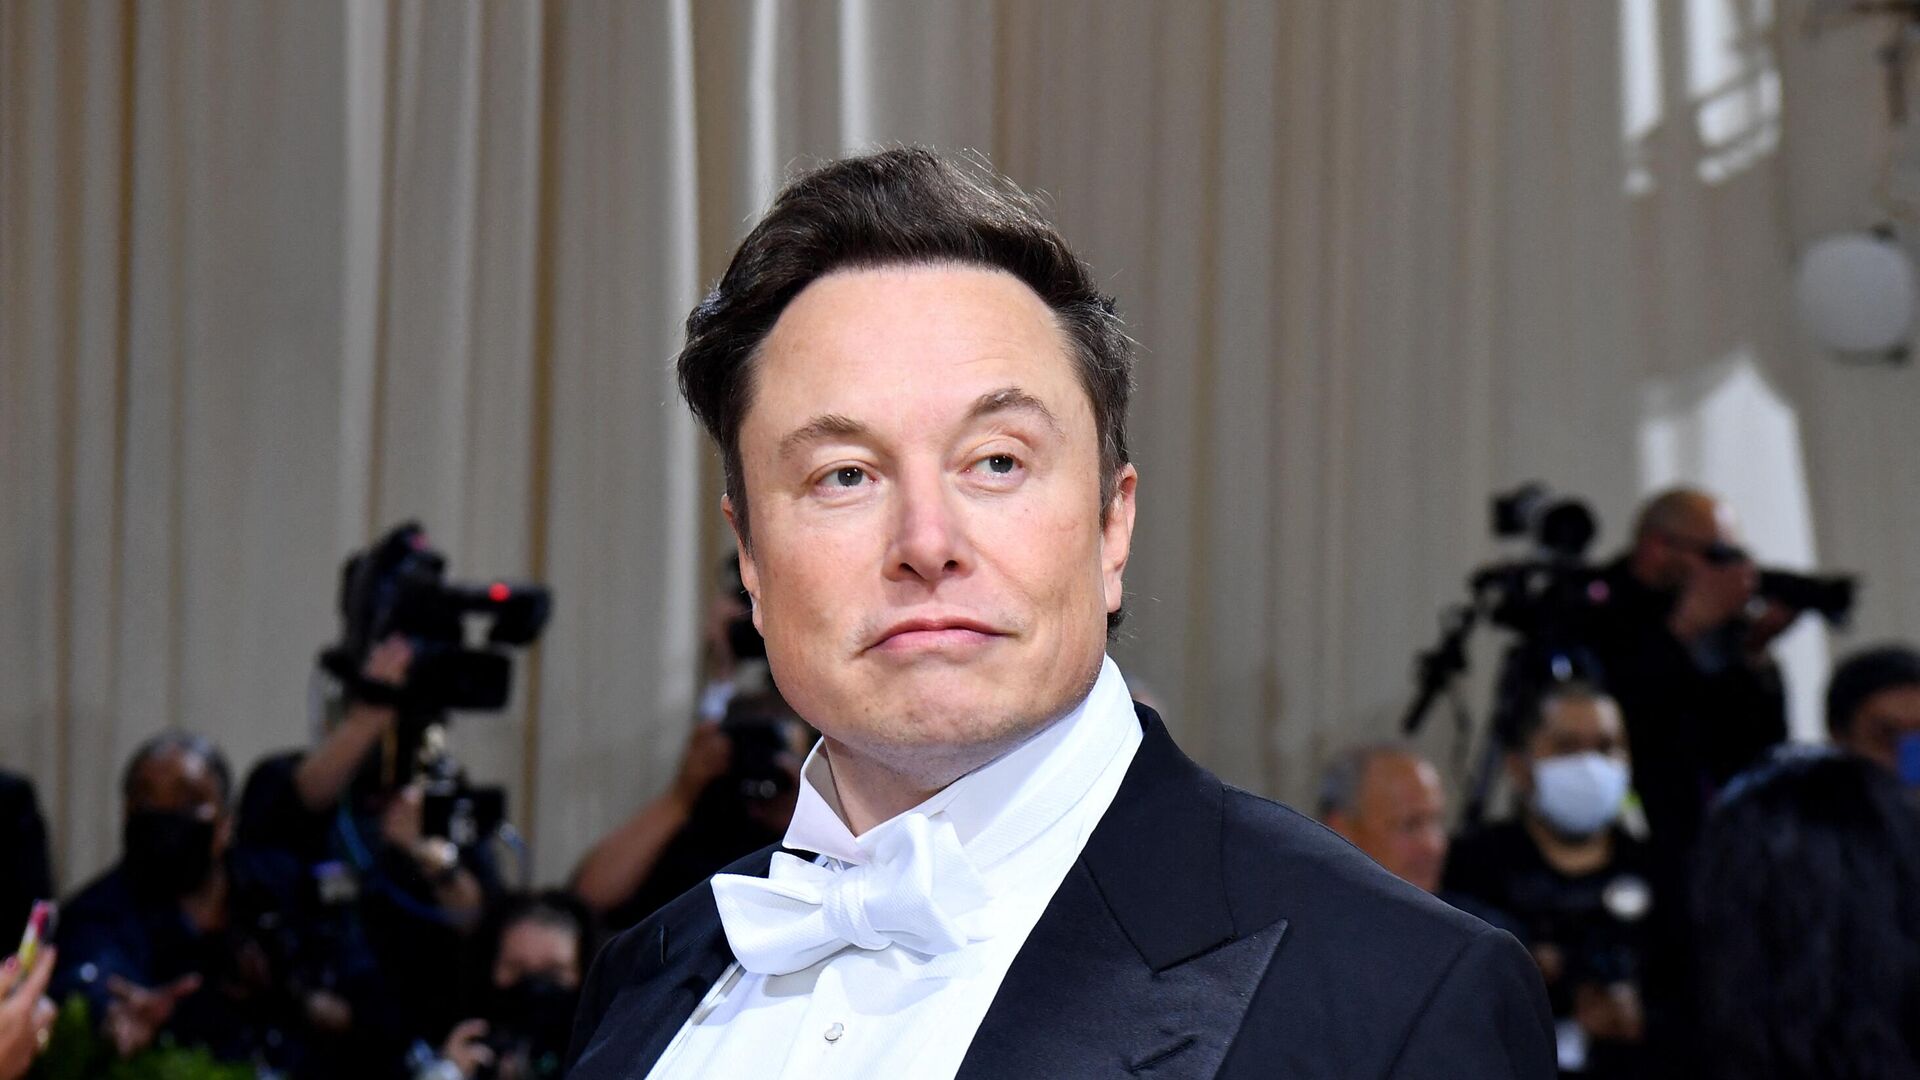 CEO, and chief engineer at SpaceX, Elon Musk, arrives for the 2022 Met Gala at the Metropolitan Museum of Art on May 2, 2022, in New York. - Sputnik India, 1920, 04.01.2023